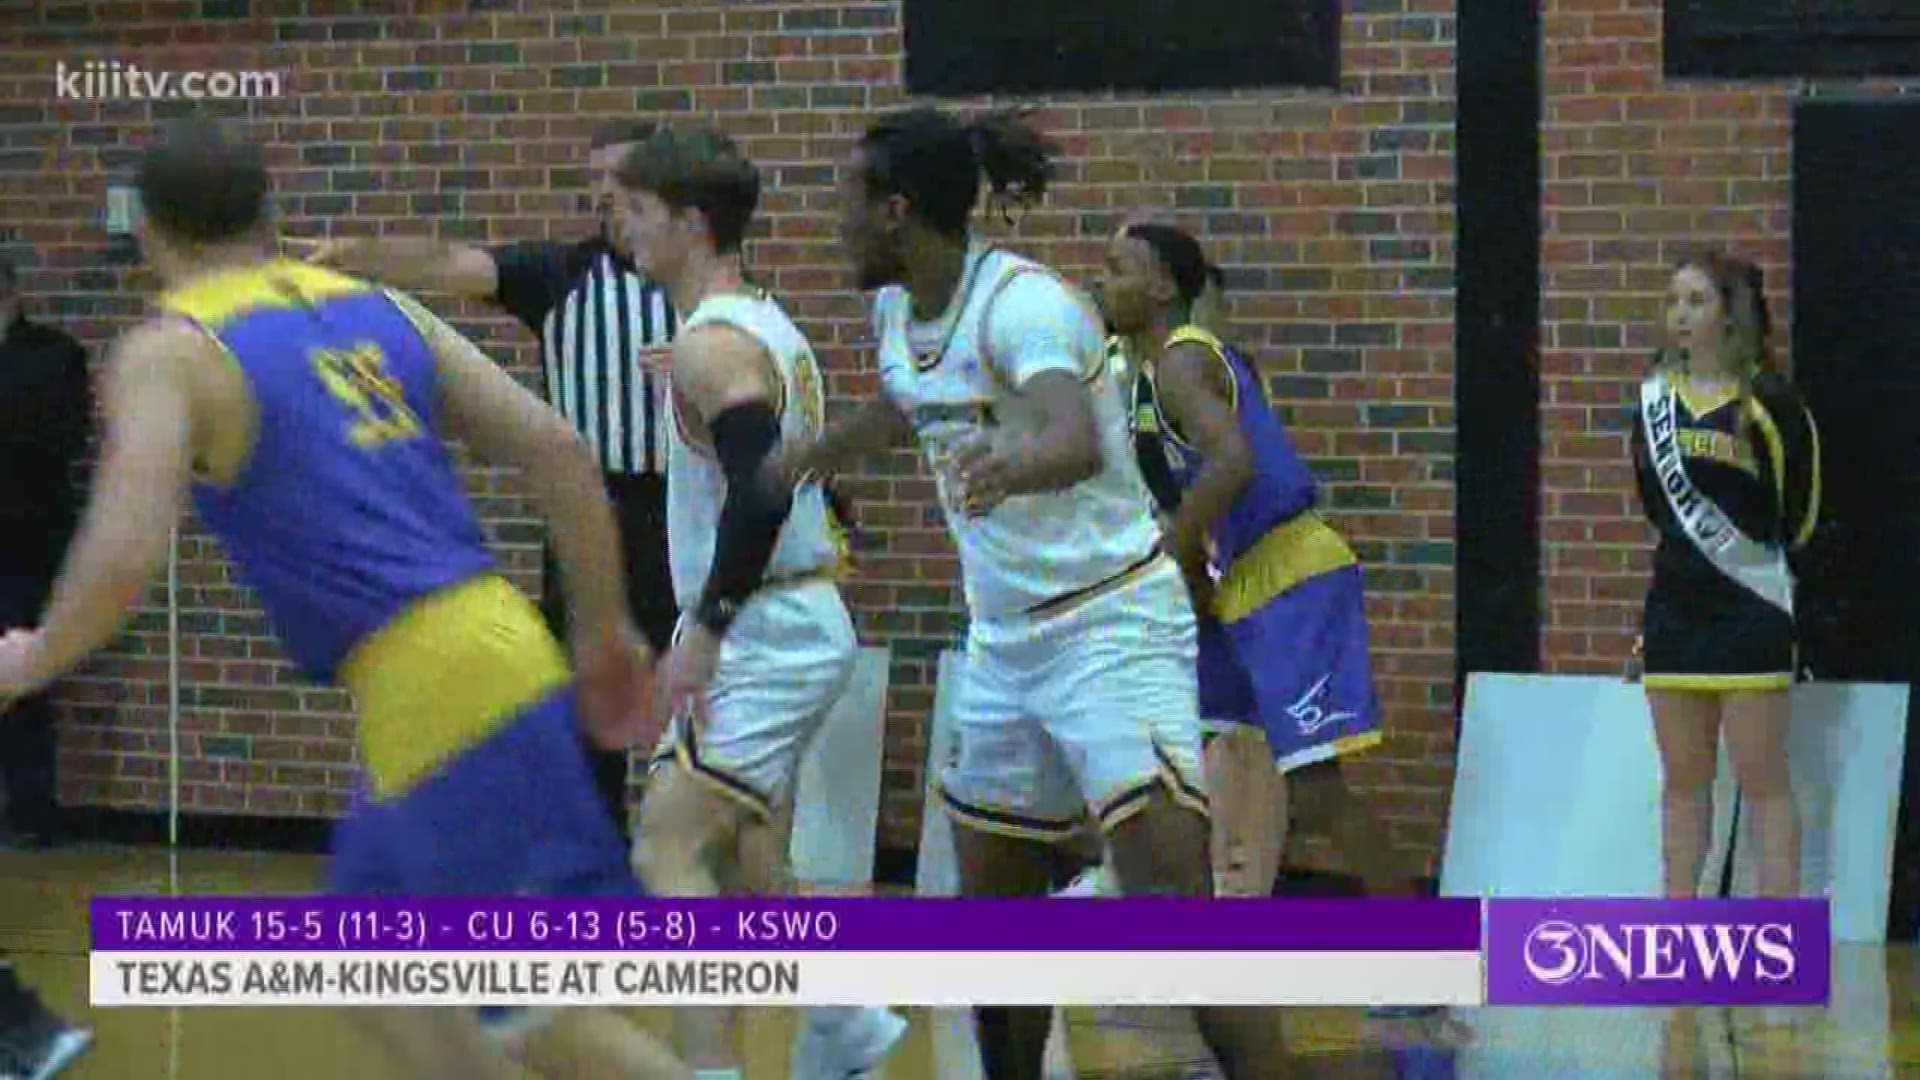 Texas A&M-Kingsville basketball split it's double-header at Cameron with the men winning 92-85 and the women falling 68-50.